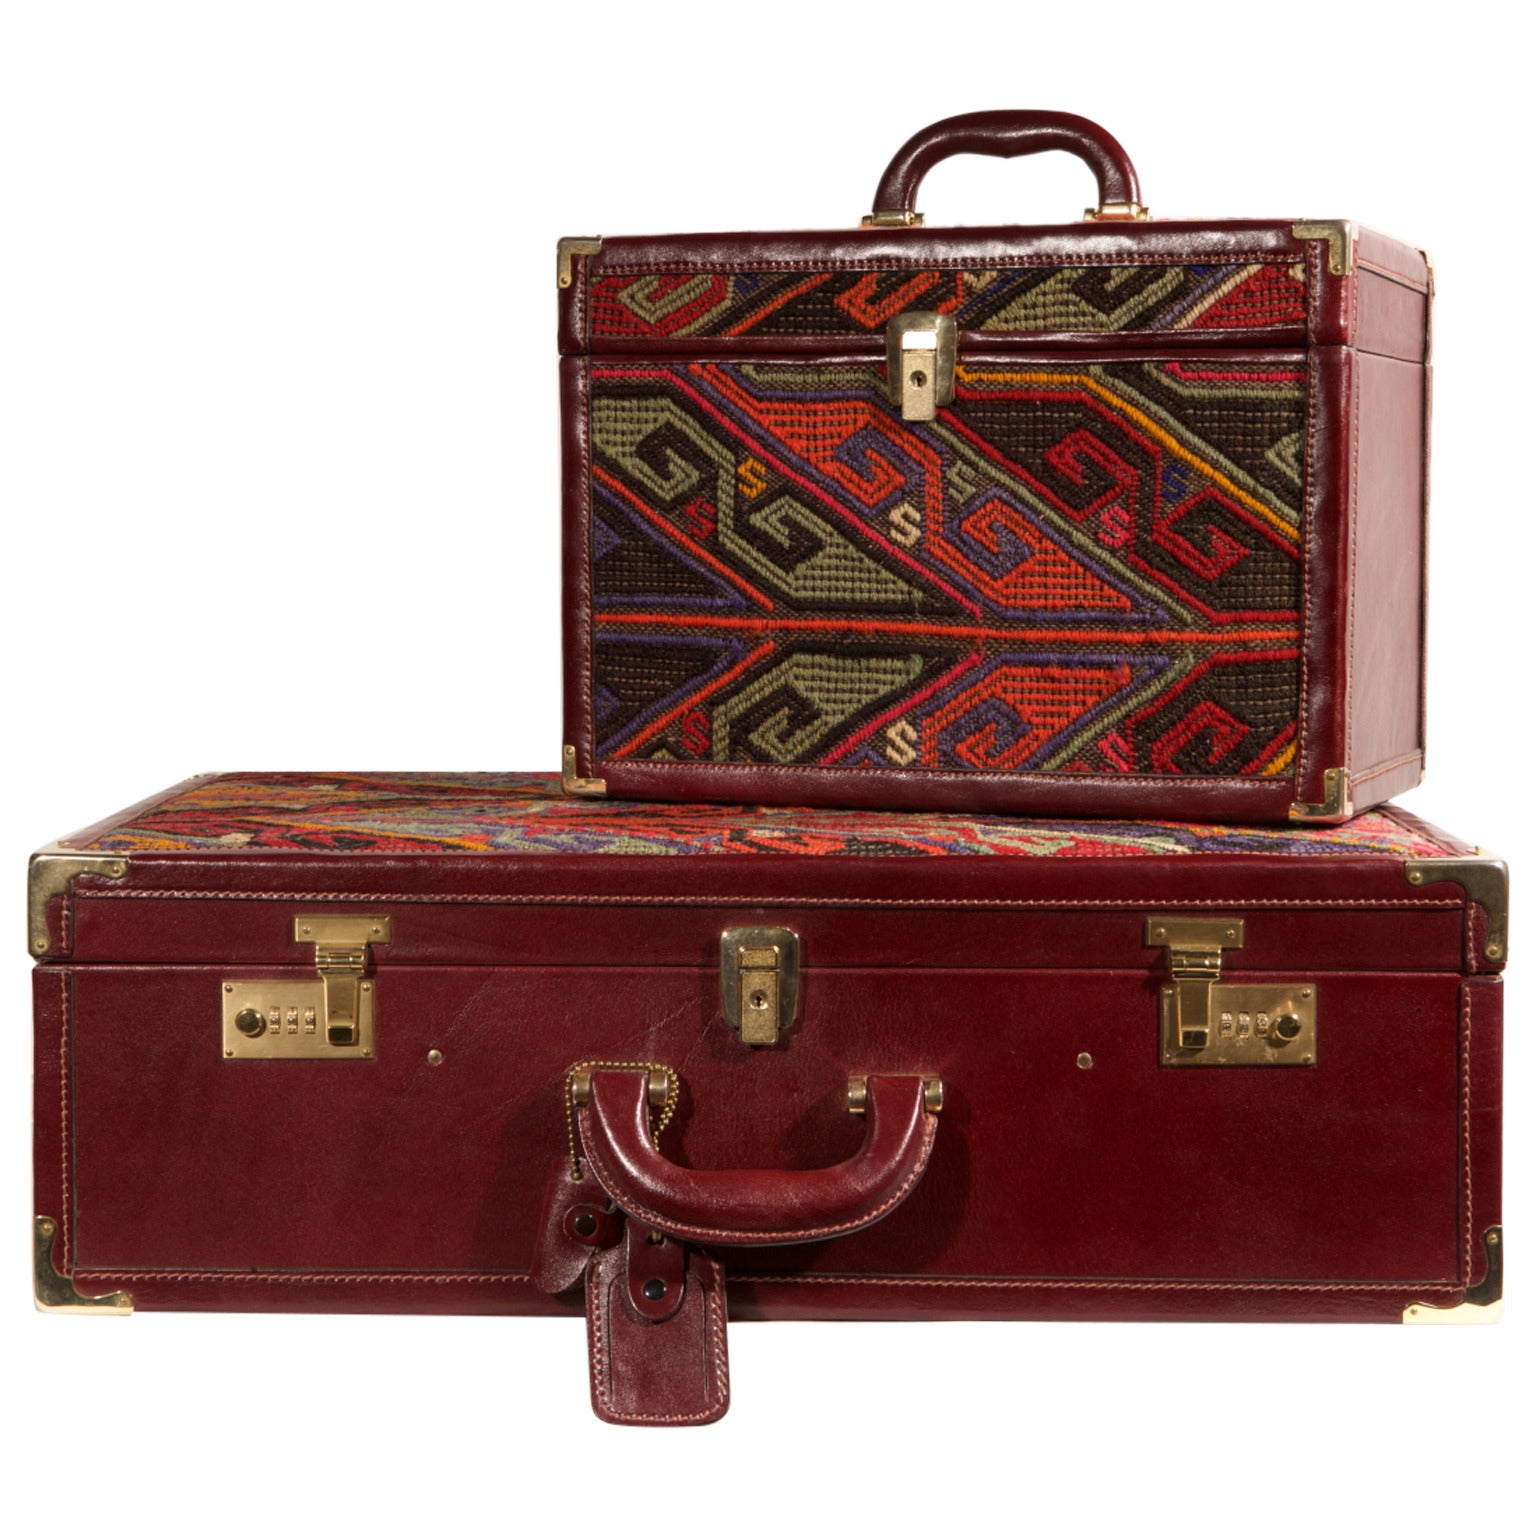 SET Suitcase and Beauty Case with Kilim and Leather, Vuitton Model